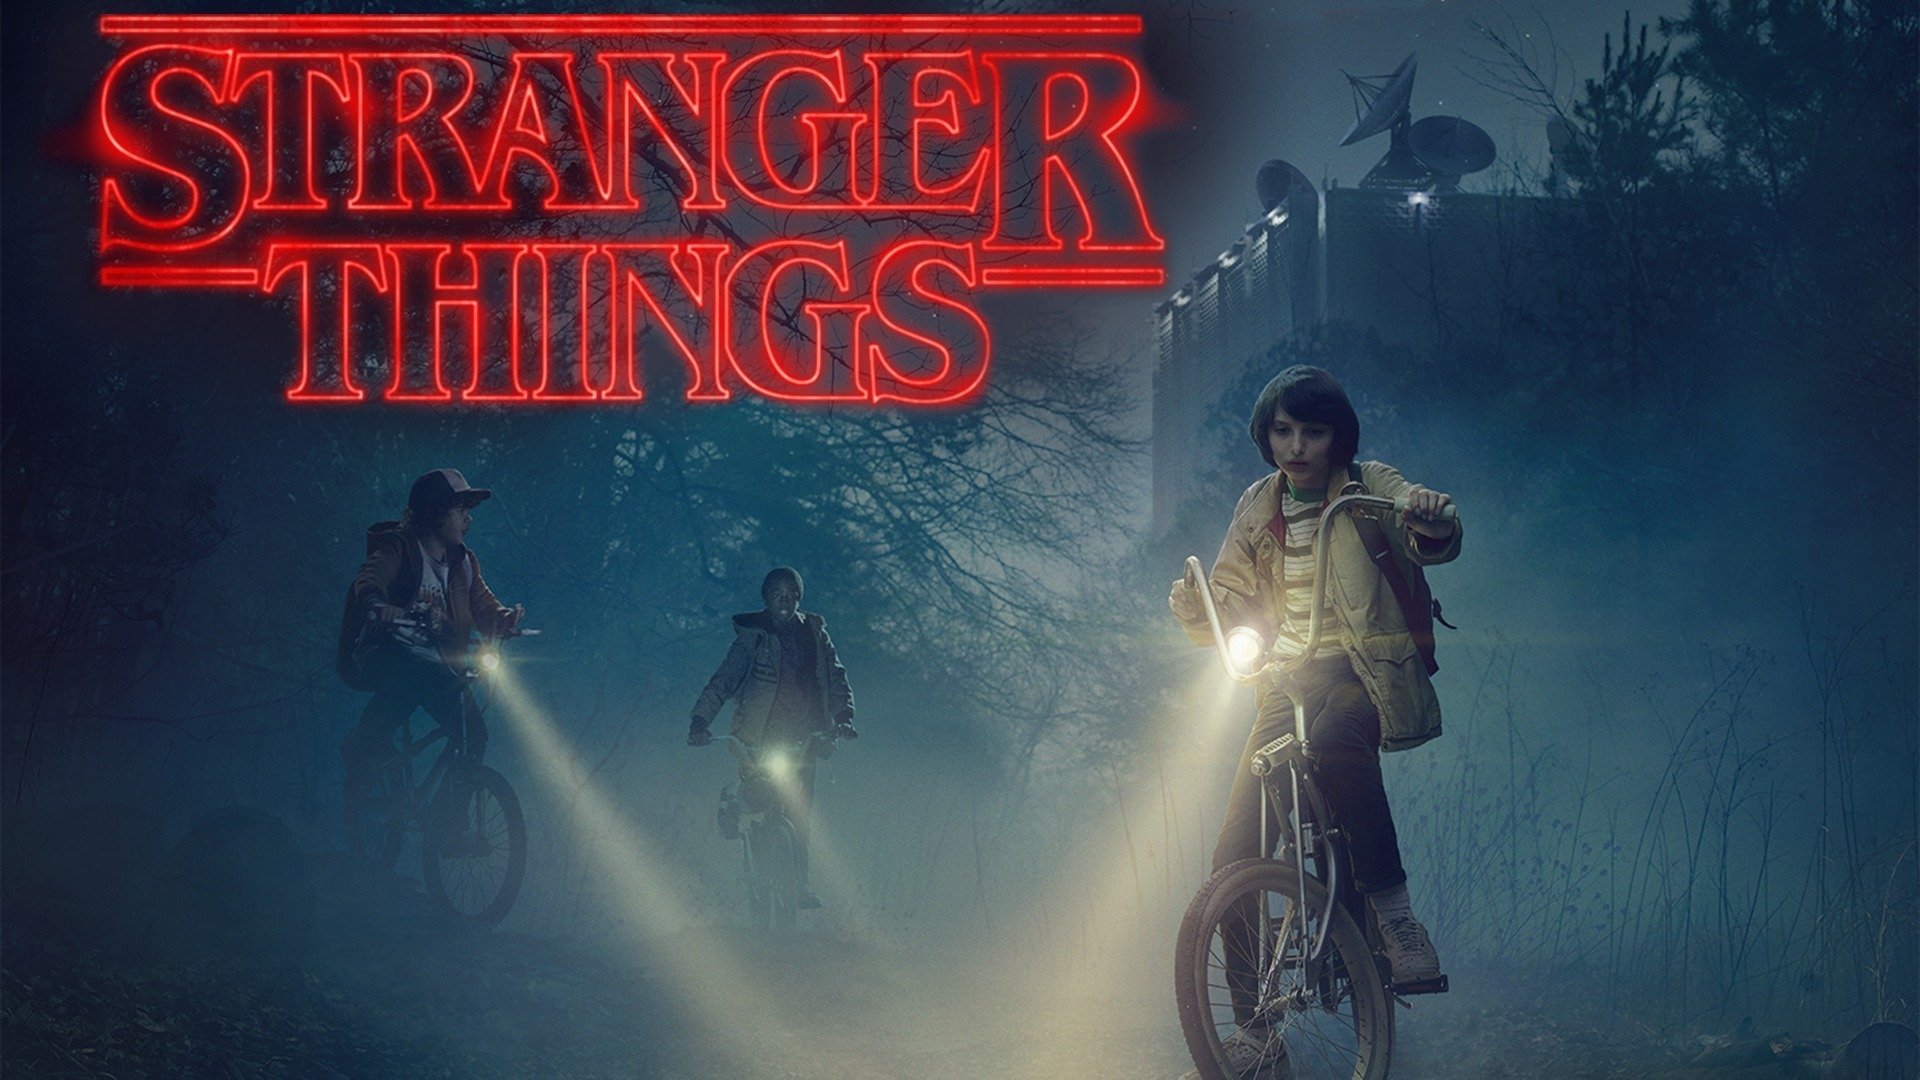 Stranger things s1. Watch stranger things with English Subtitles. Stranger things Wallpaper. Stranger things watch with subtitles